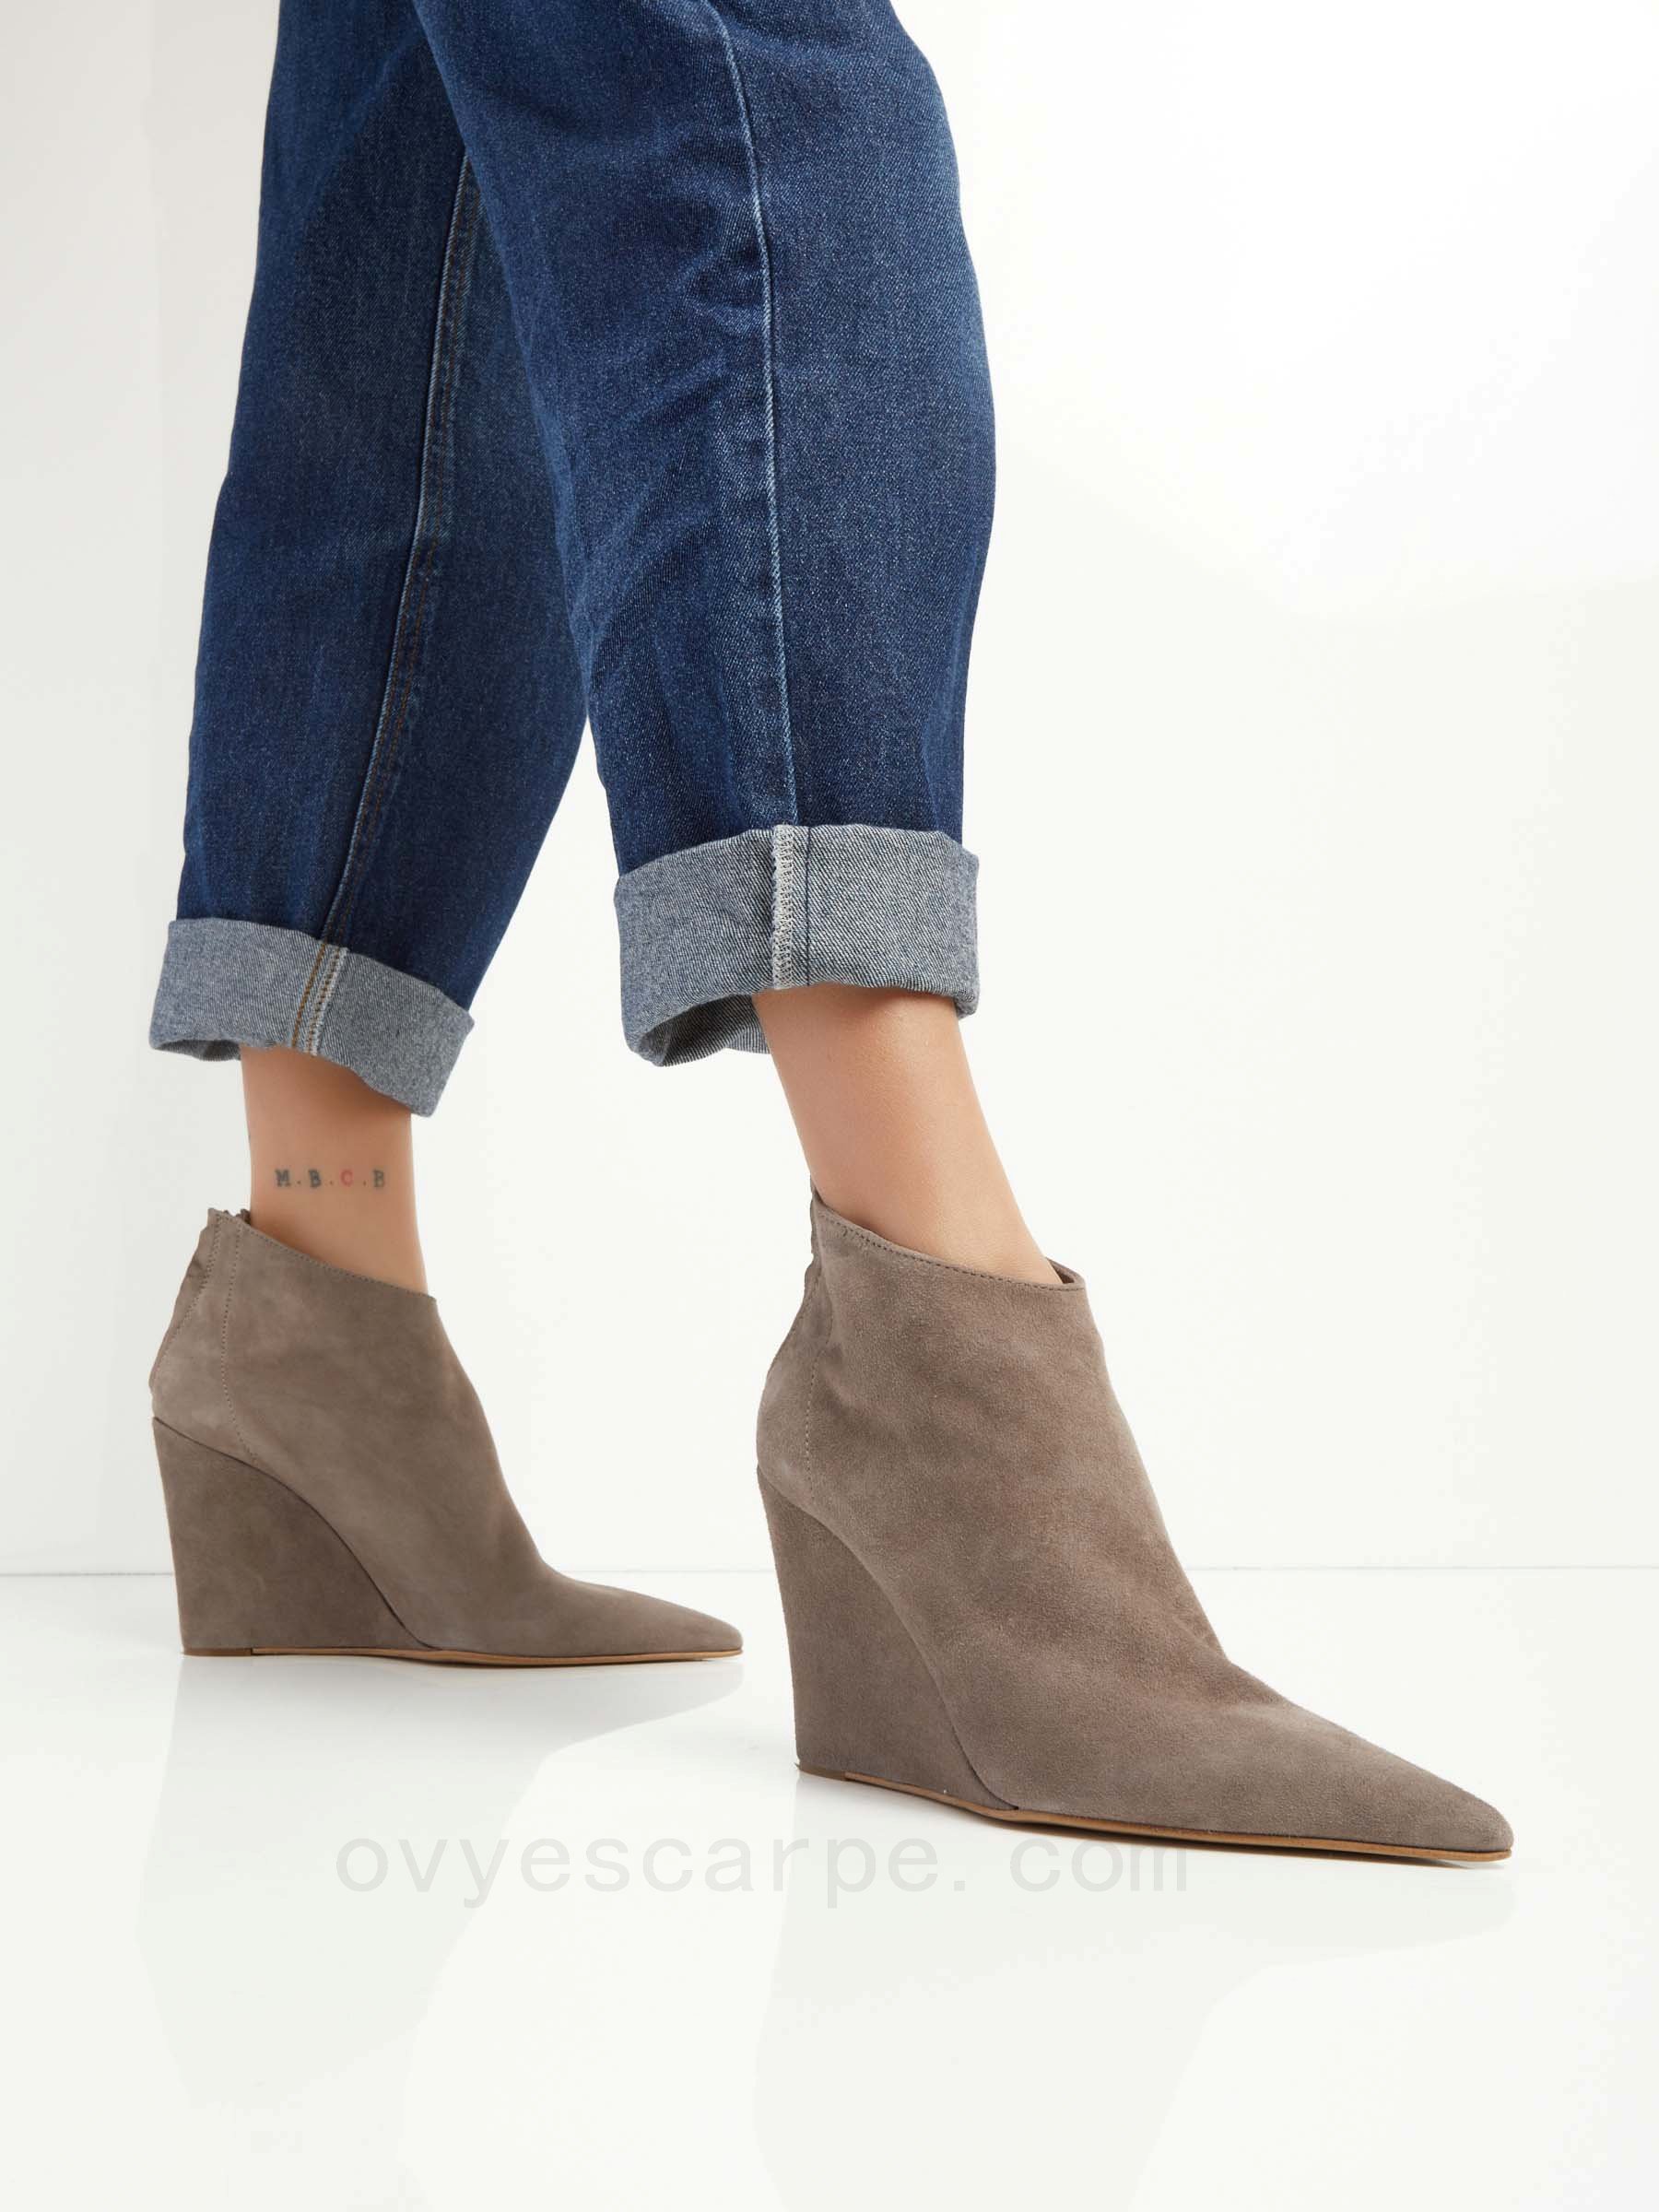 Online Wedge Leather Ankle Boots F08161027-0468 ovye scarpe